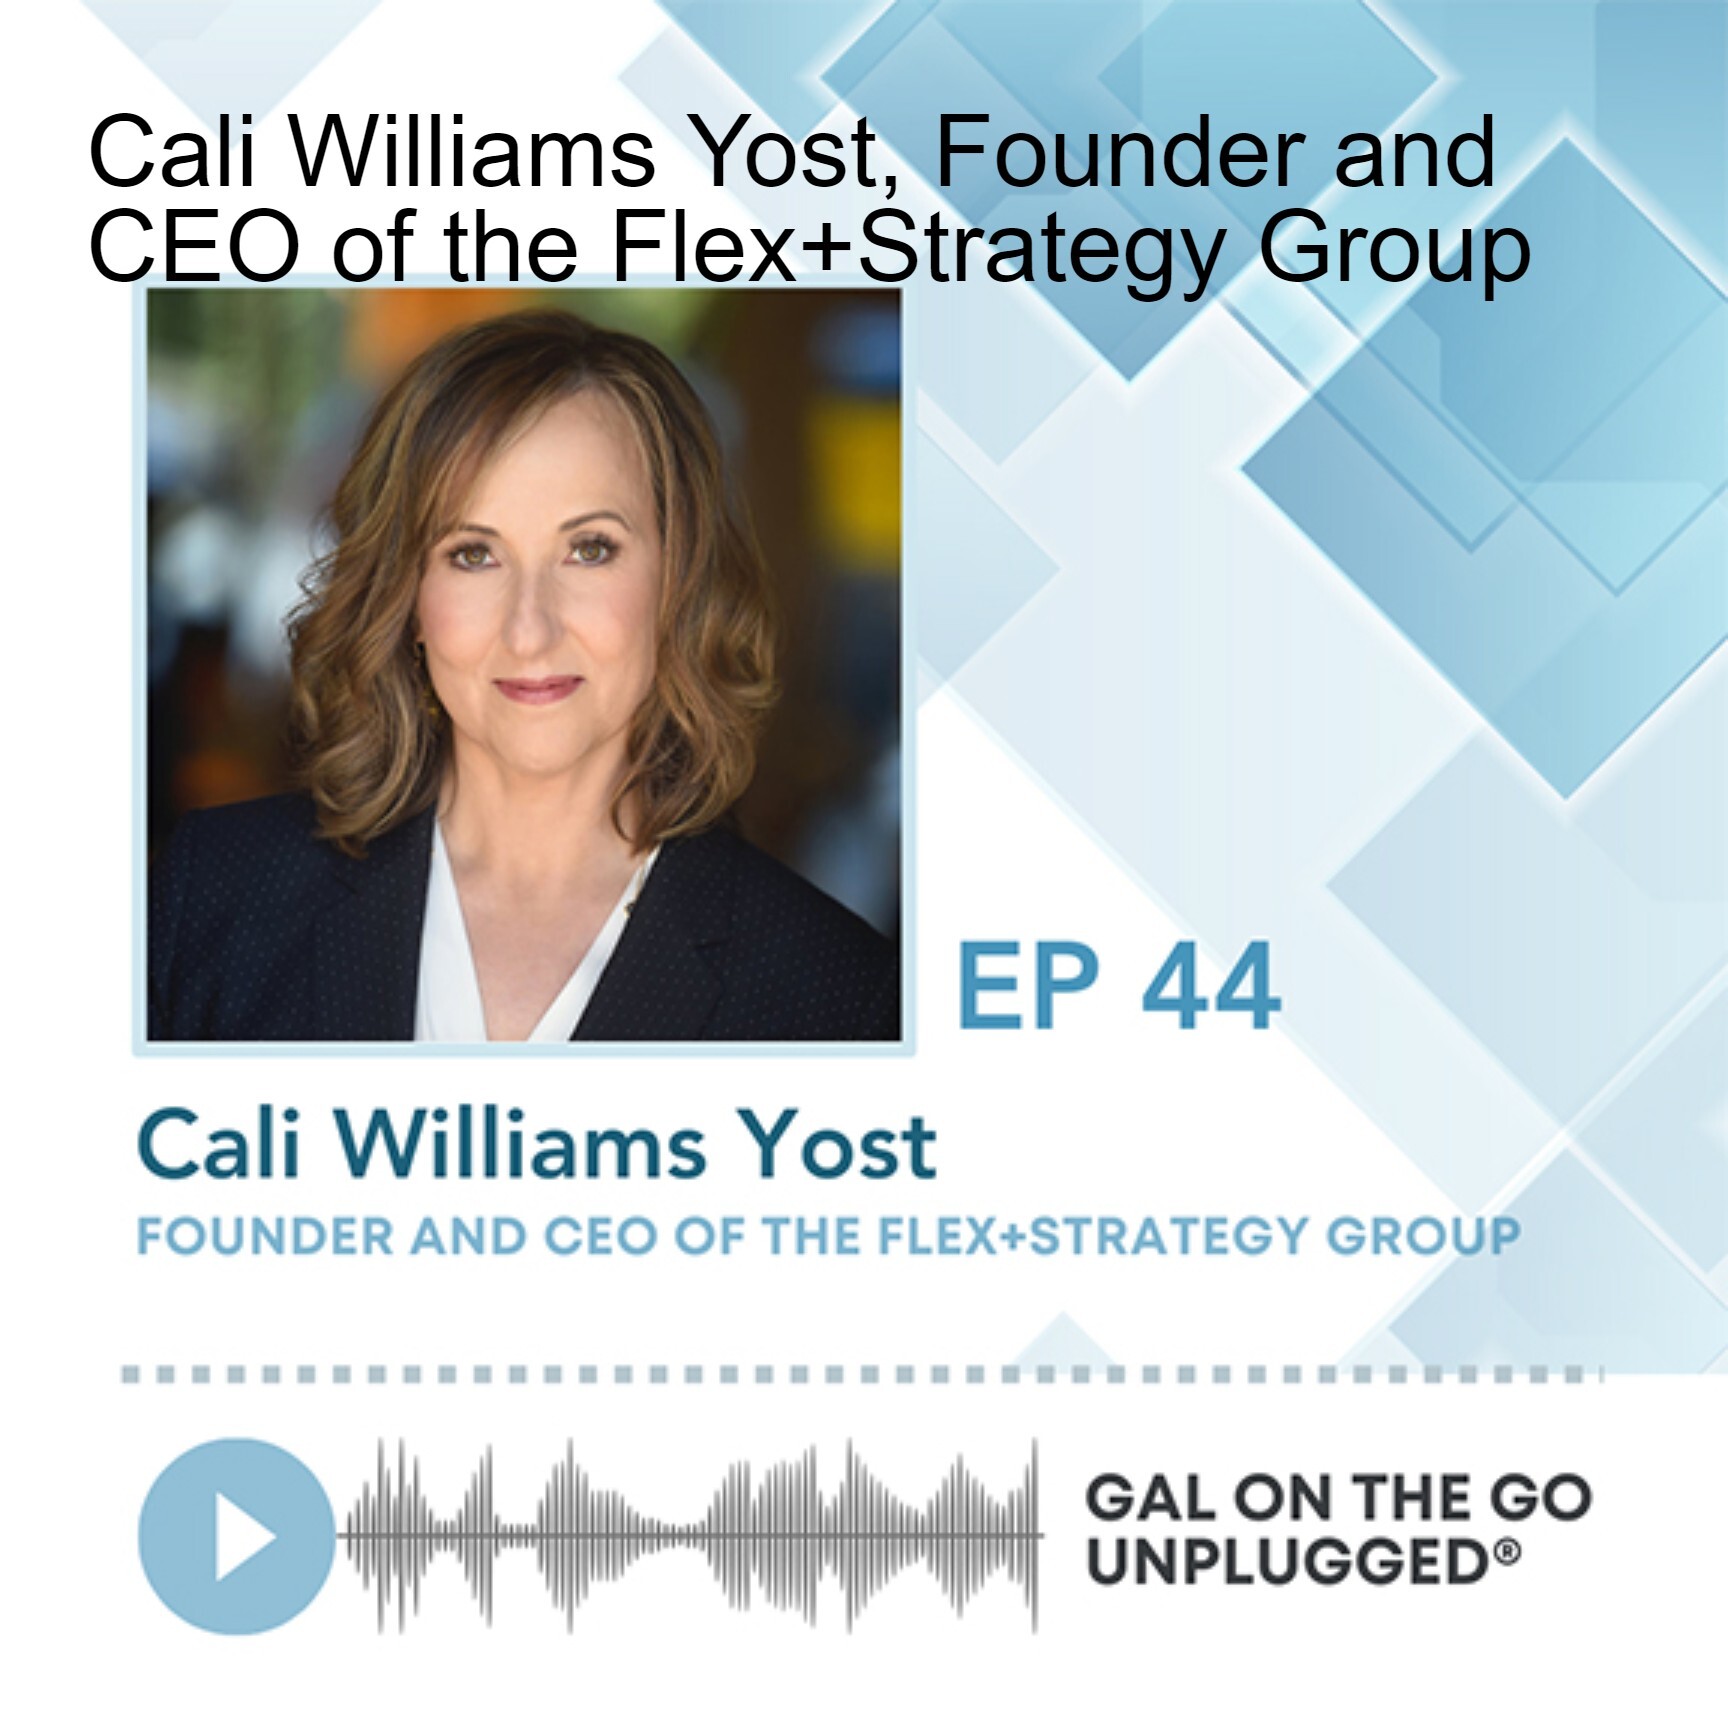 Cali Williams Yost, Founder and CEO of the Flex+Strategy Group